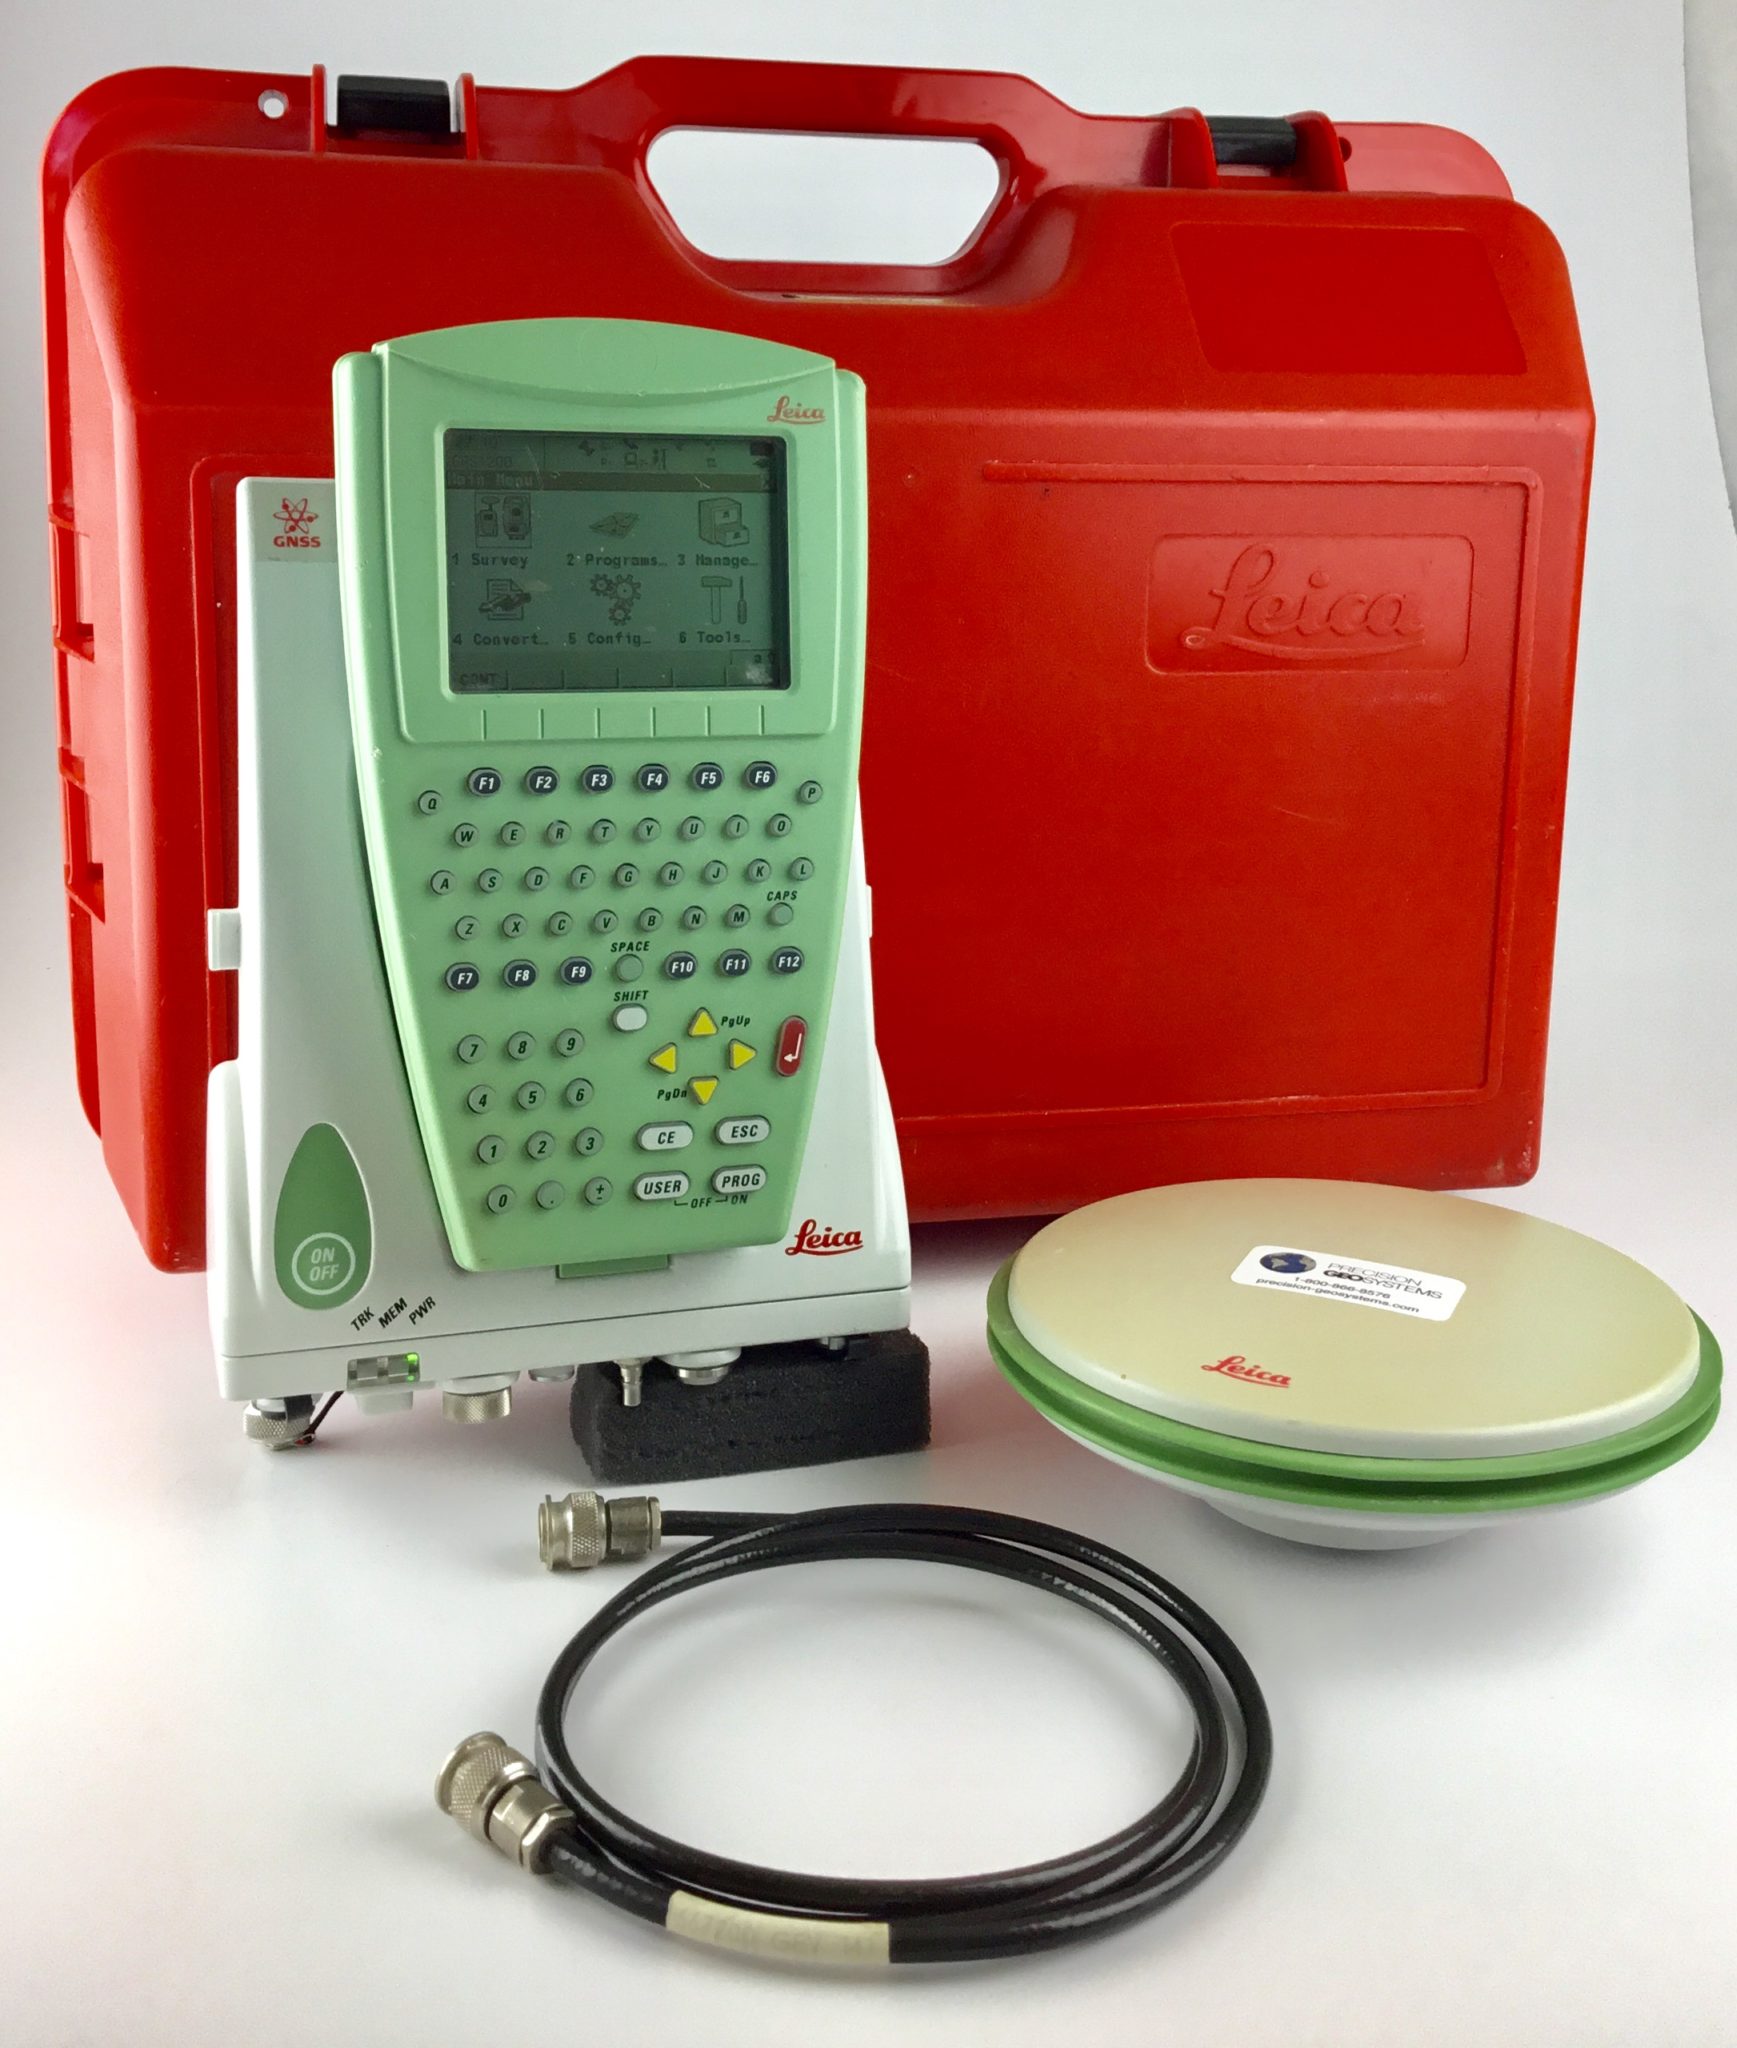 Leica PRO GNSS Reference Station | Precision Geosystems, Inc.